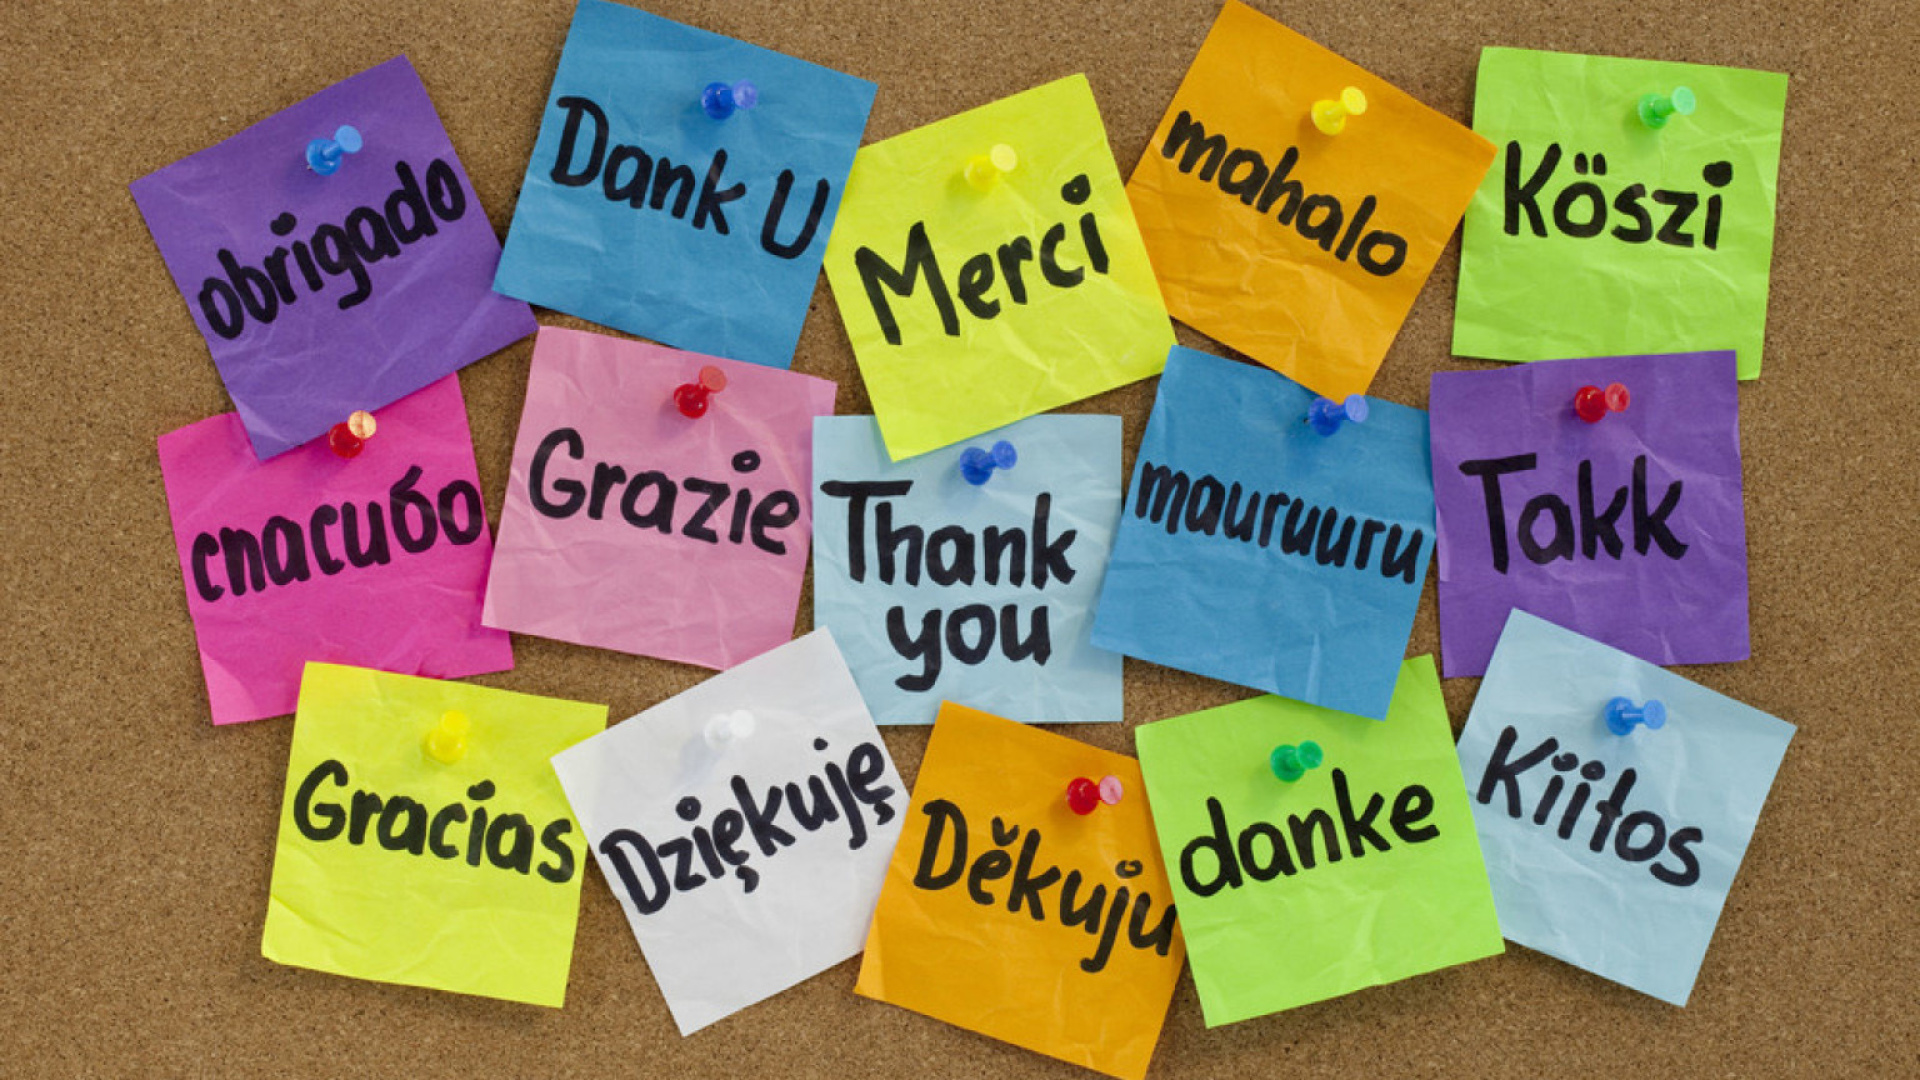 How To Say Thank You in Different Languages screenshot #1 1920x1080